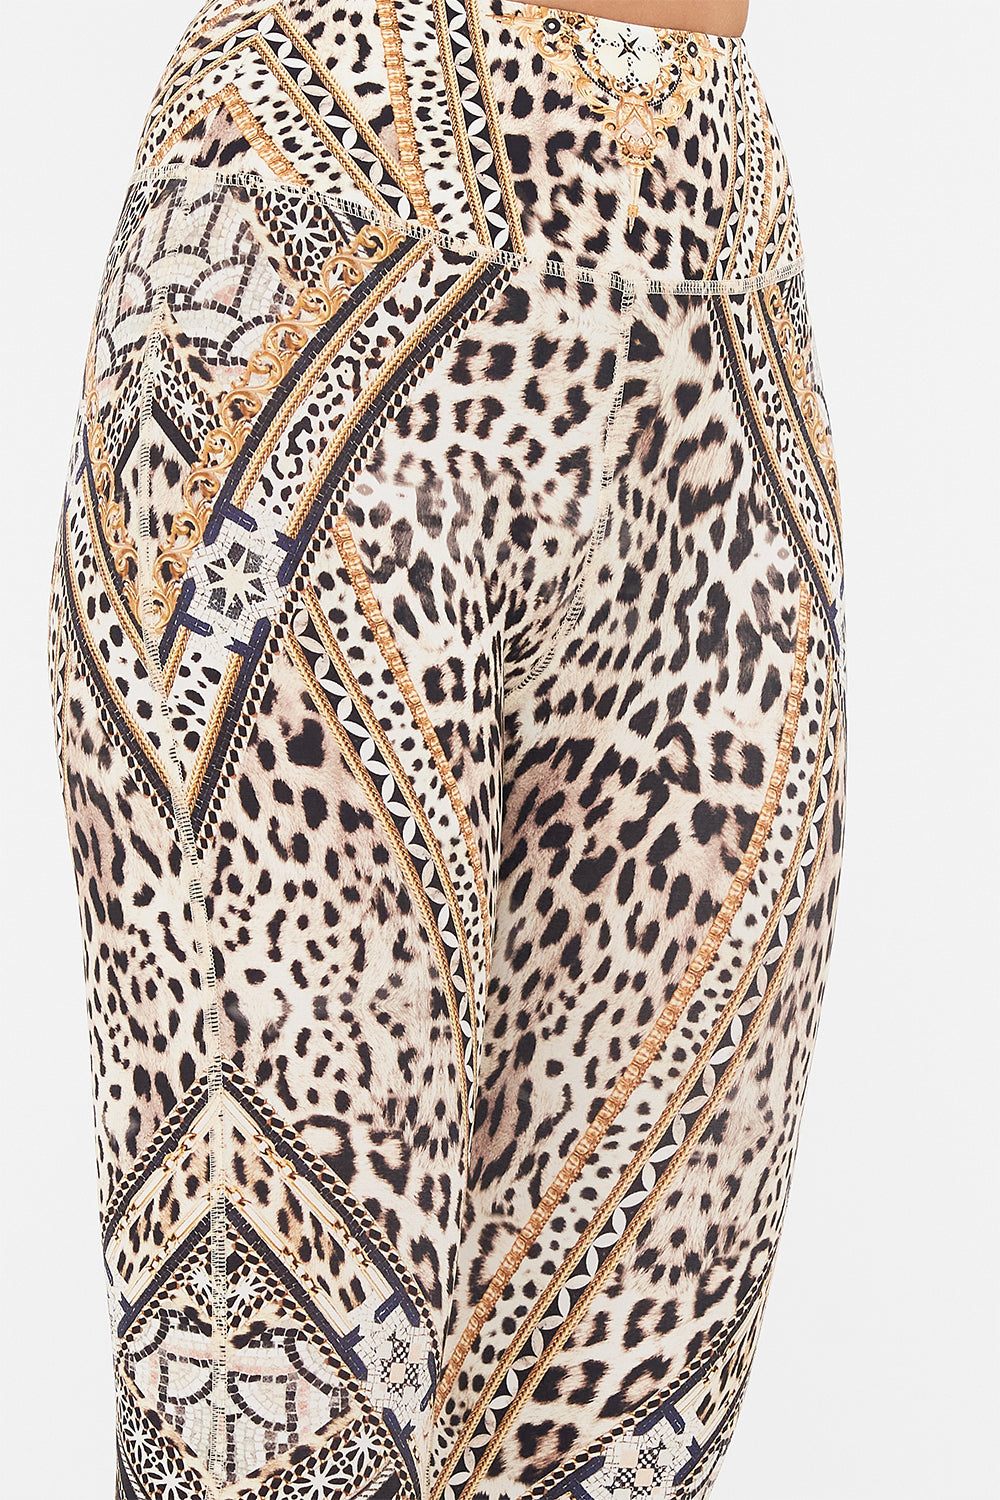 ASOS LUXE ACTIVE co-ord legging with ruched mesh sides in snake print